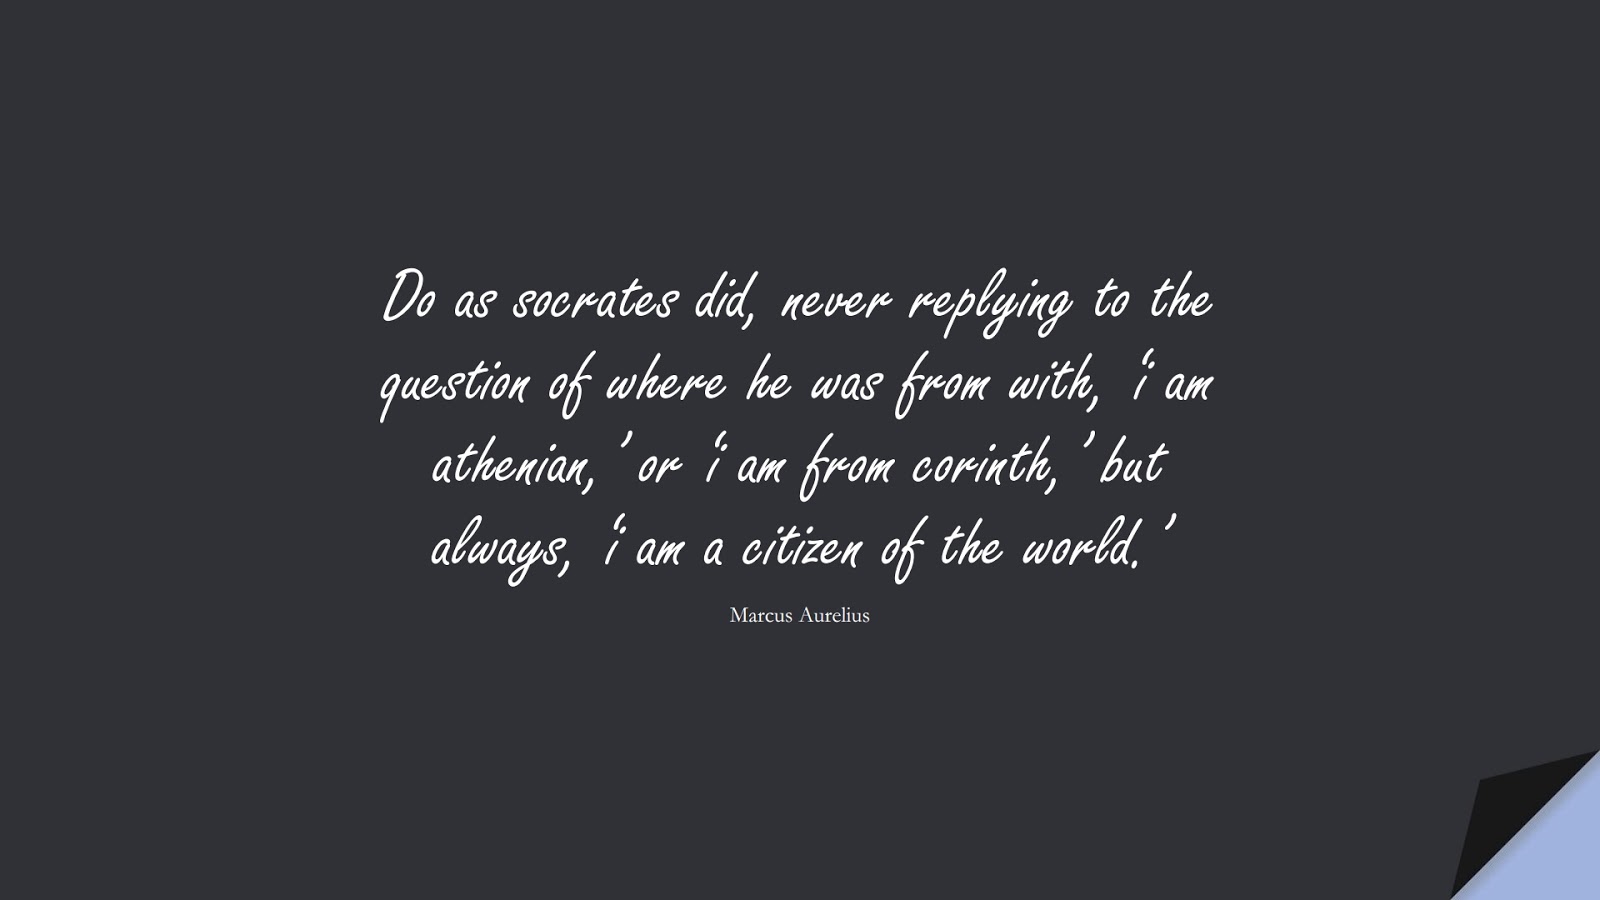 Do as socrates did, never replying to the question of where he was from with, ‘i am athenian,’ or ‘i am from corinth,’ but always, ‘i am a citizen of the world.’ (Marcus Aurelius);  #MarcusAureliusQuotes